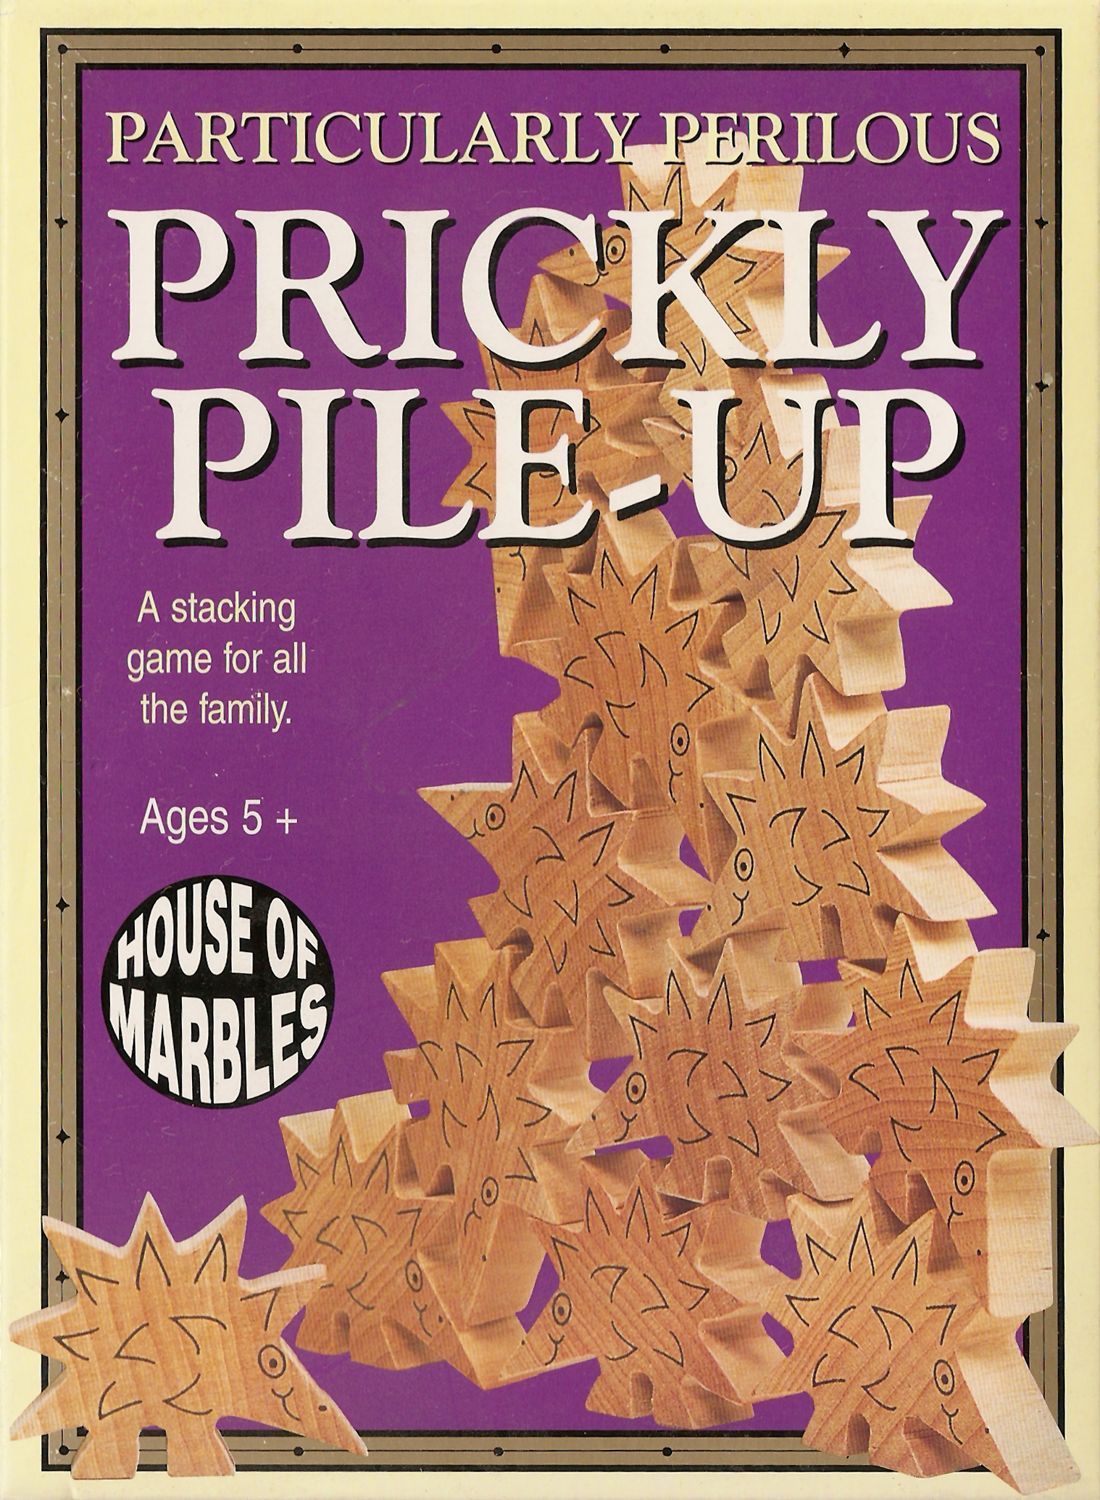 Prickly Pile-Up